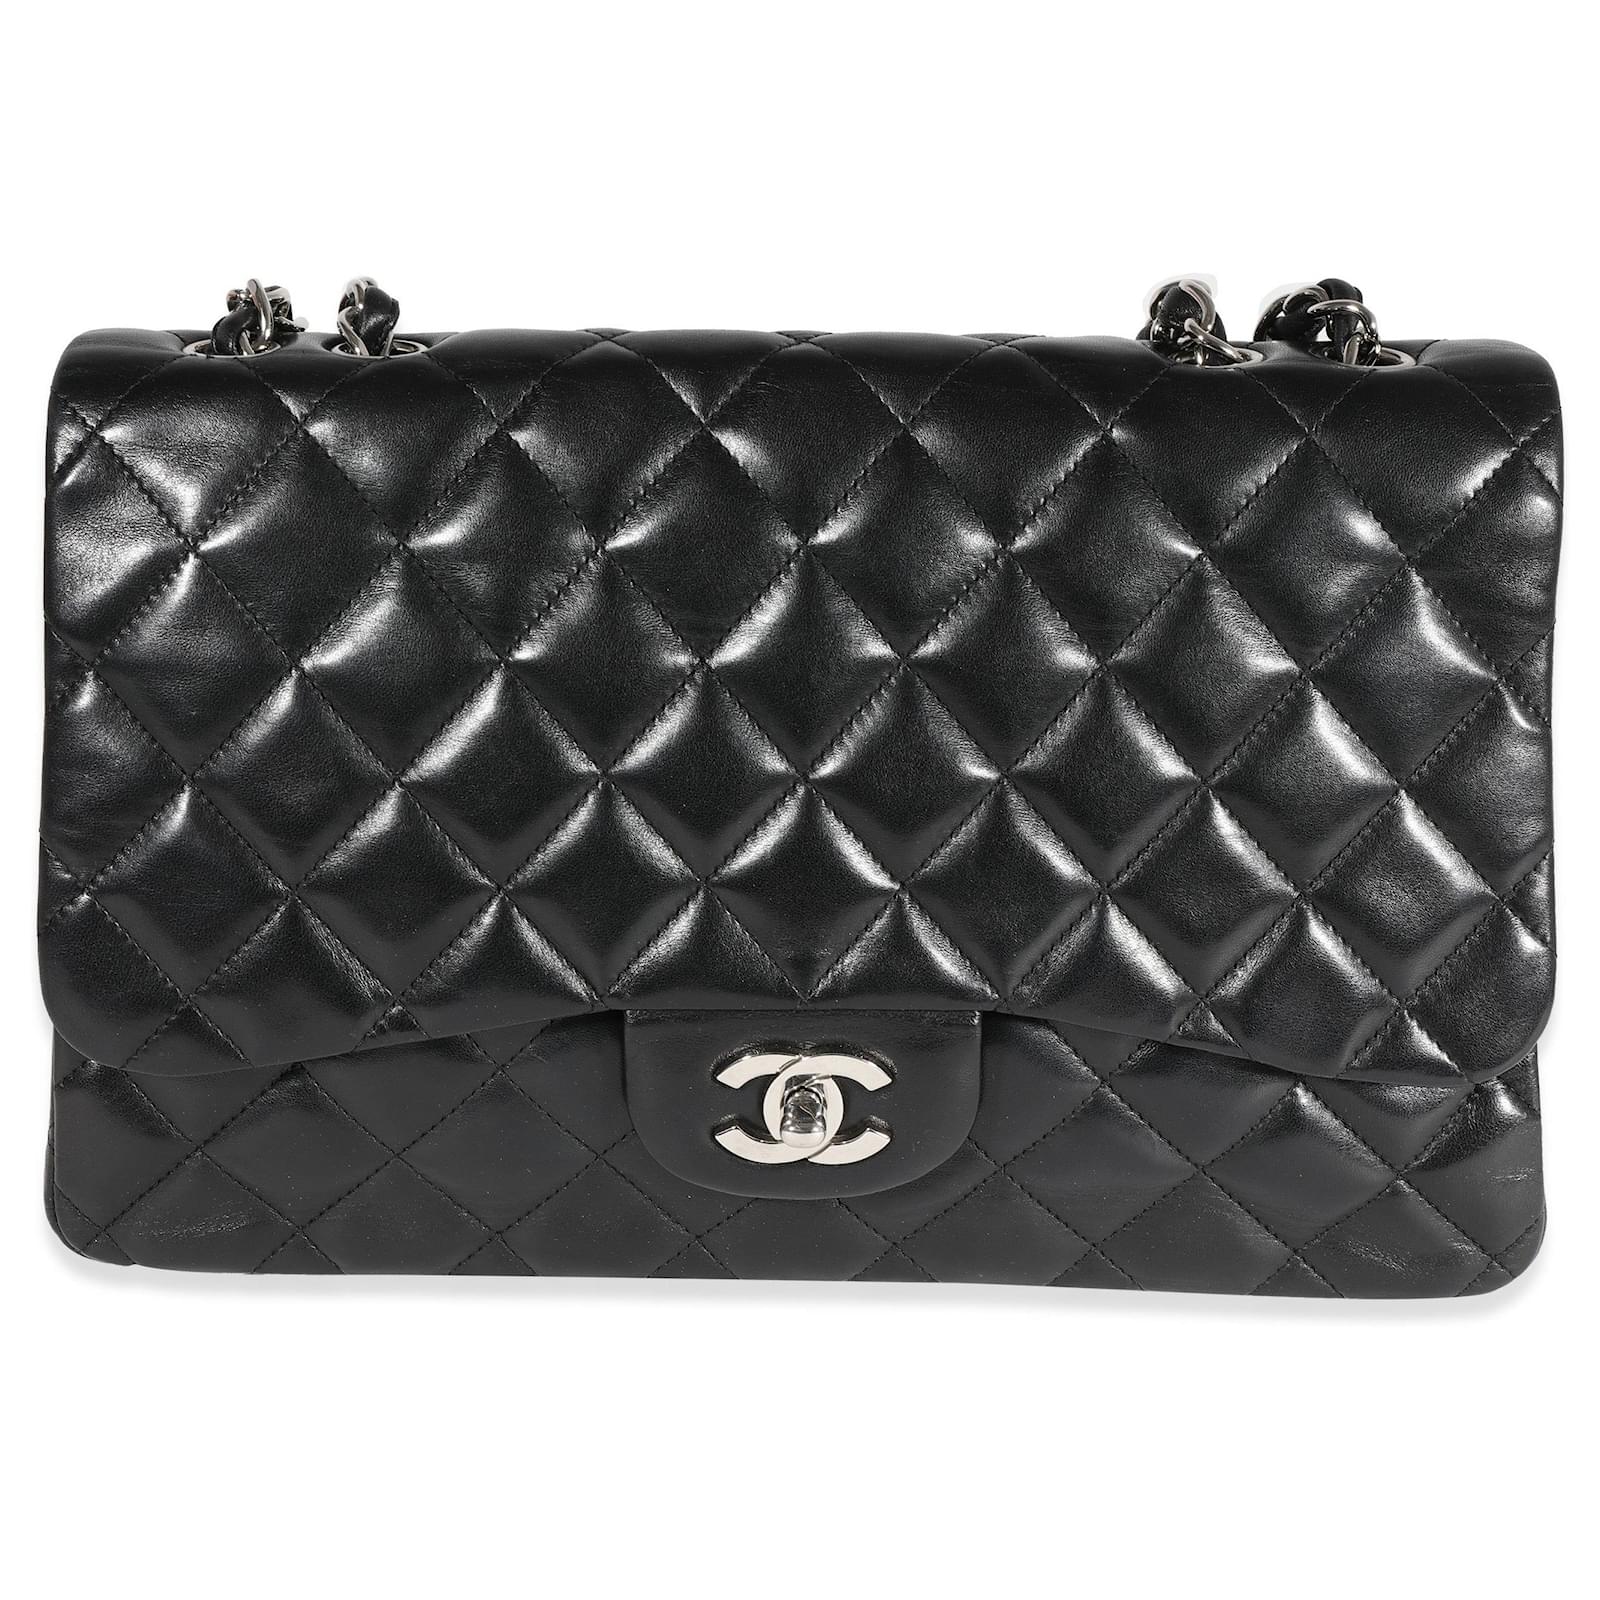 Chanel Cream Quilted Leather Jumbo Classic Single Flap Bag